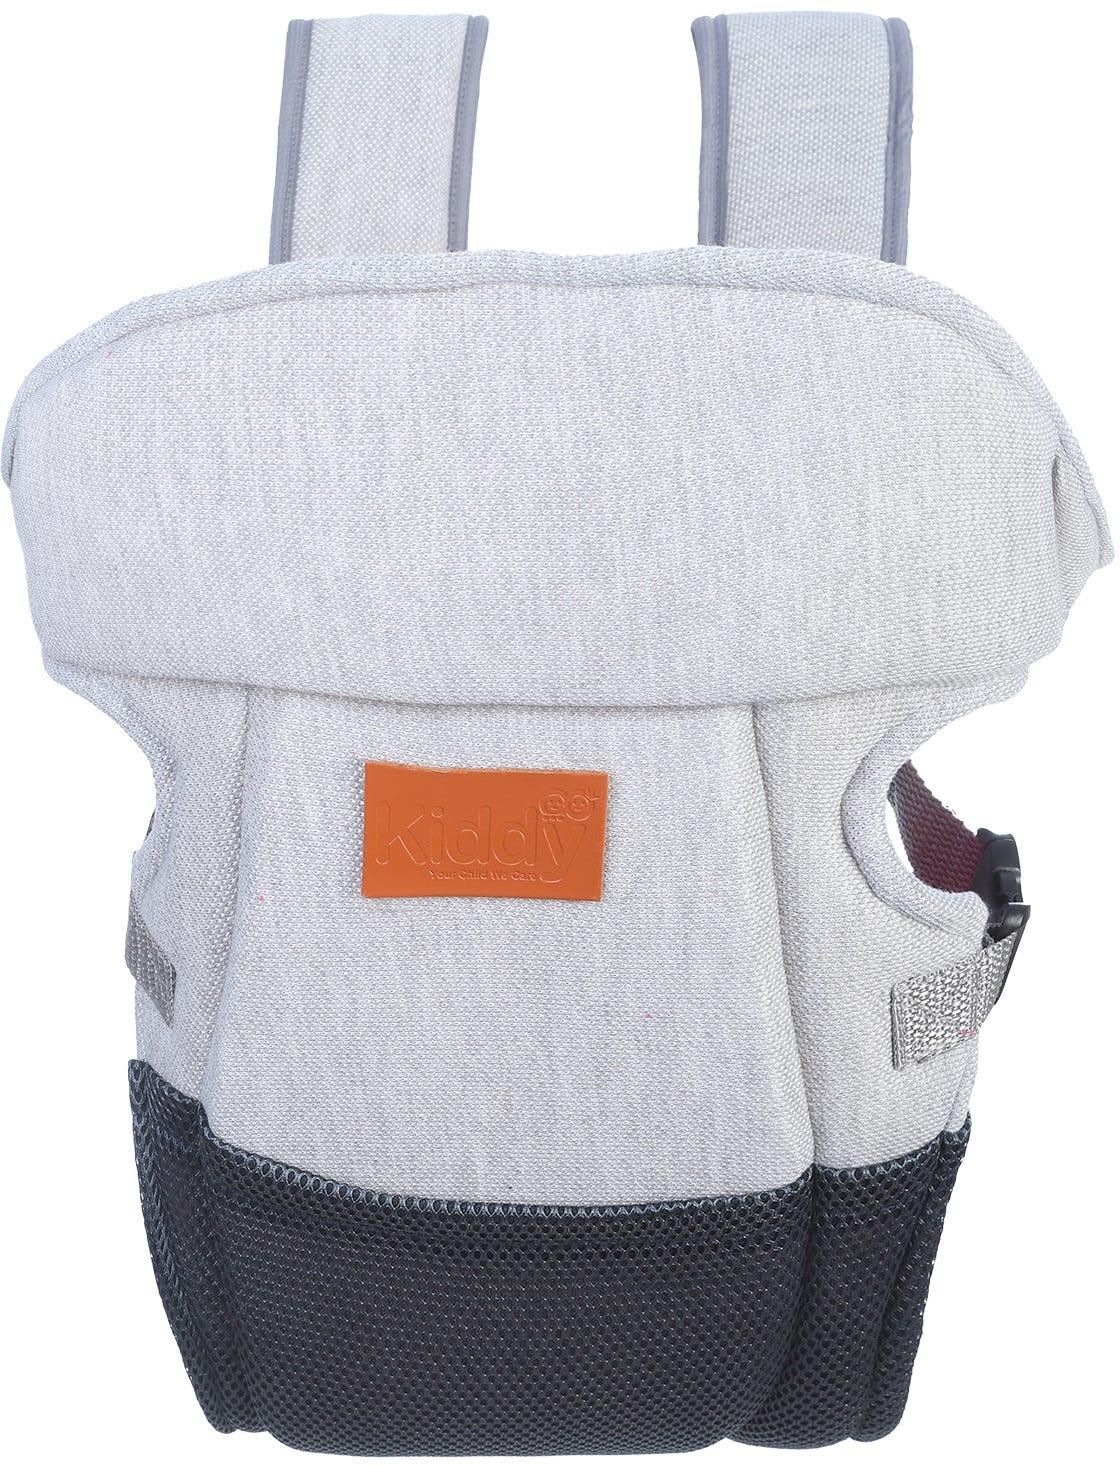 Get Boom Bom Baby Carrier Sling Portable with best offers | Raneen.com